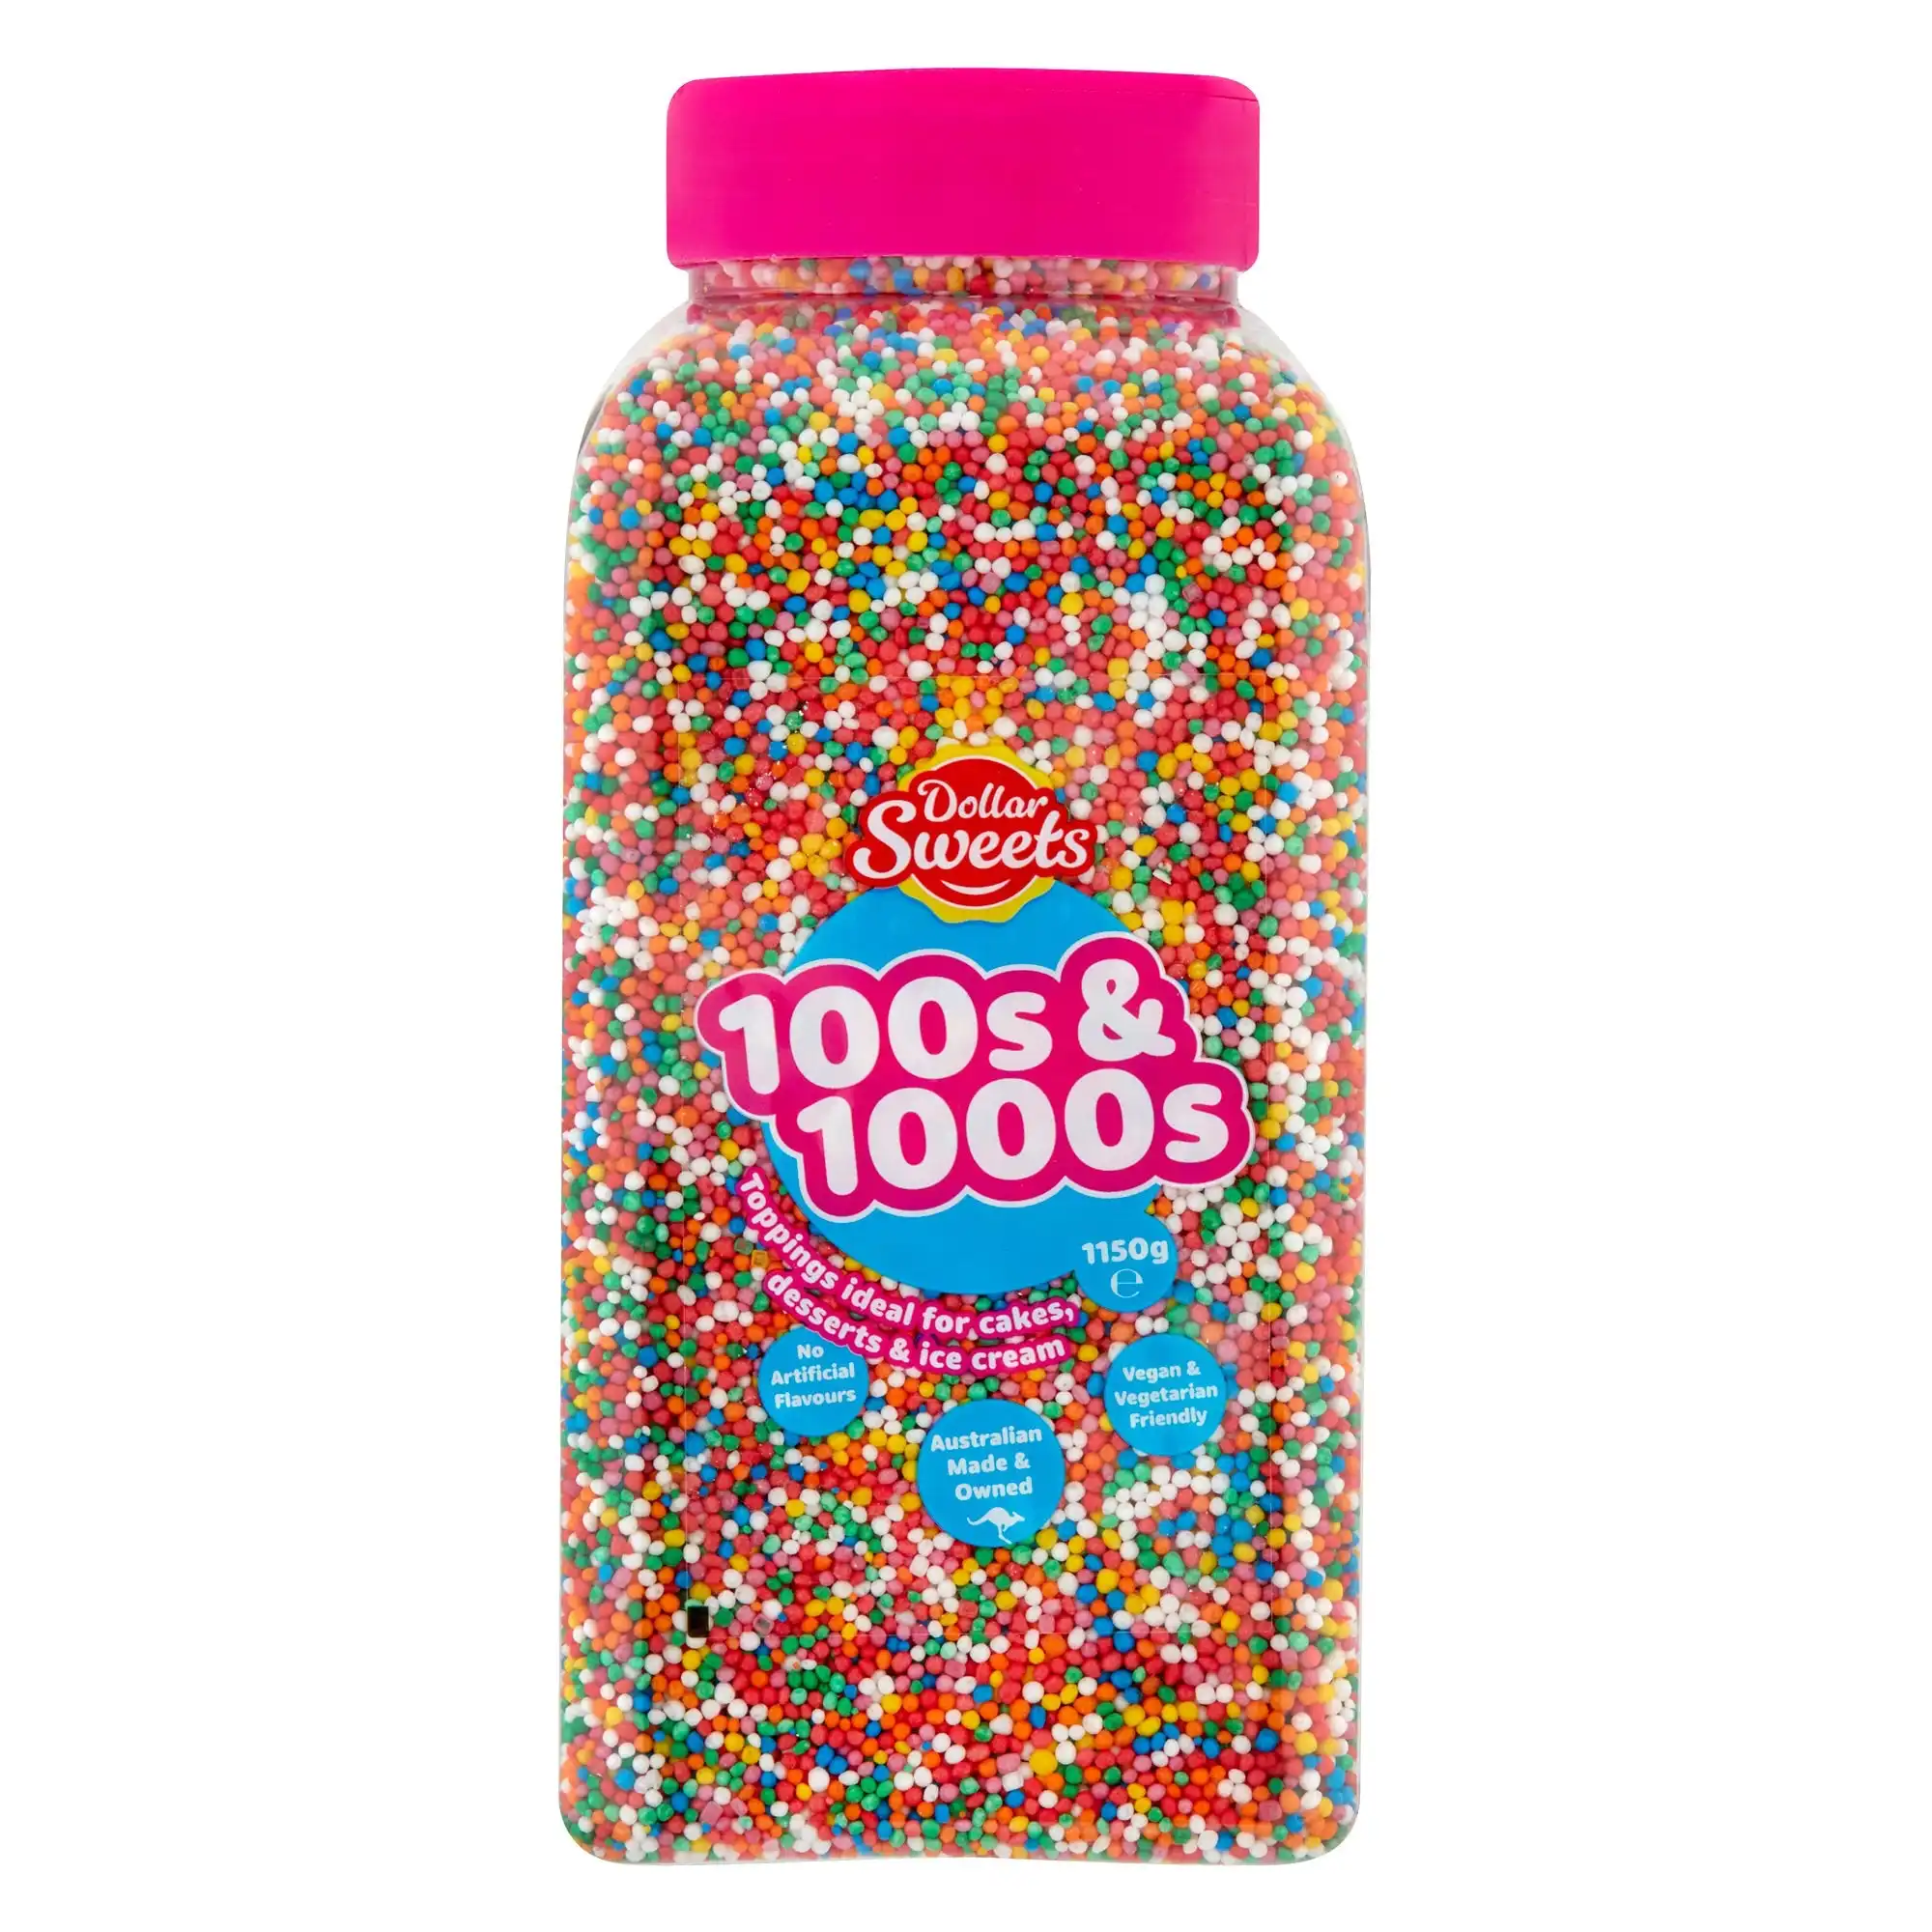 Dollar Sweets 100's and 1000's Sprinkles 1150g